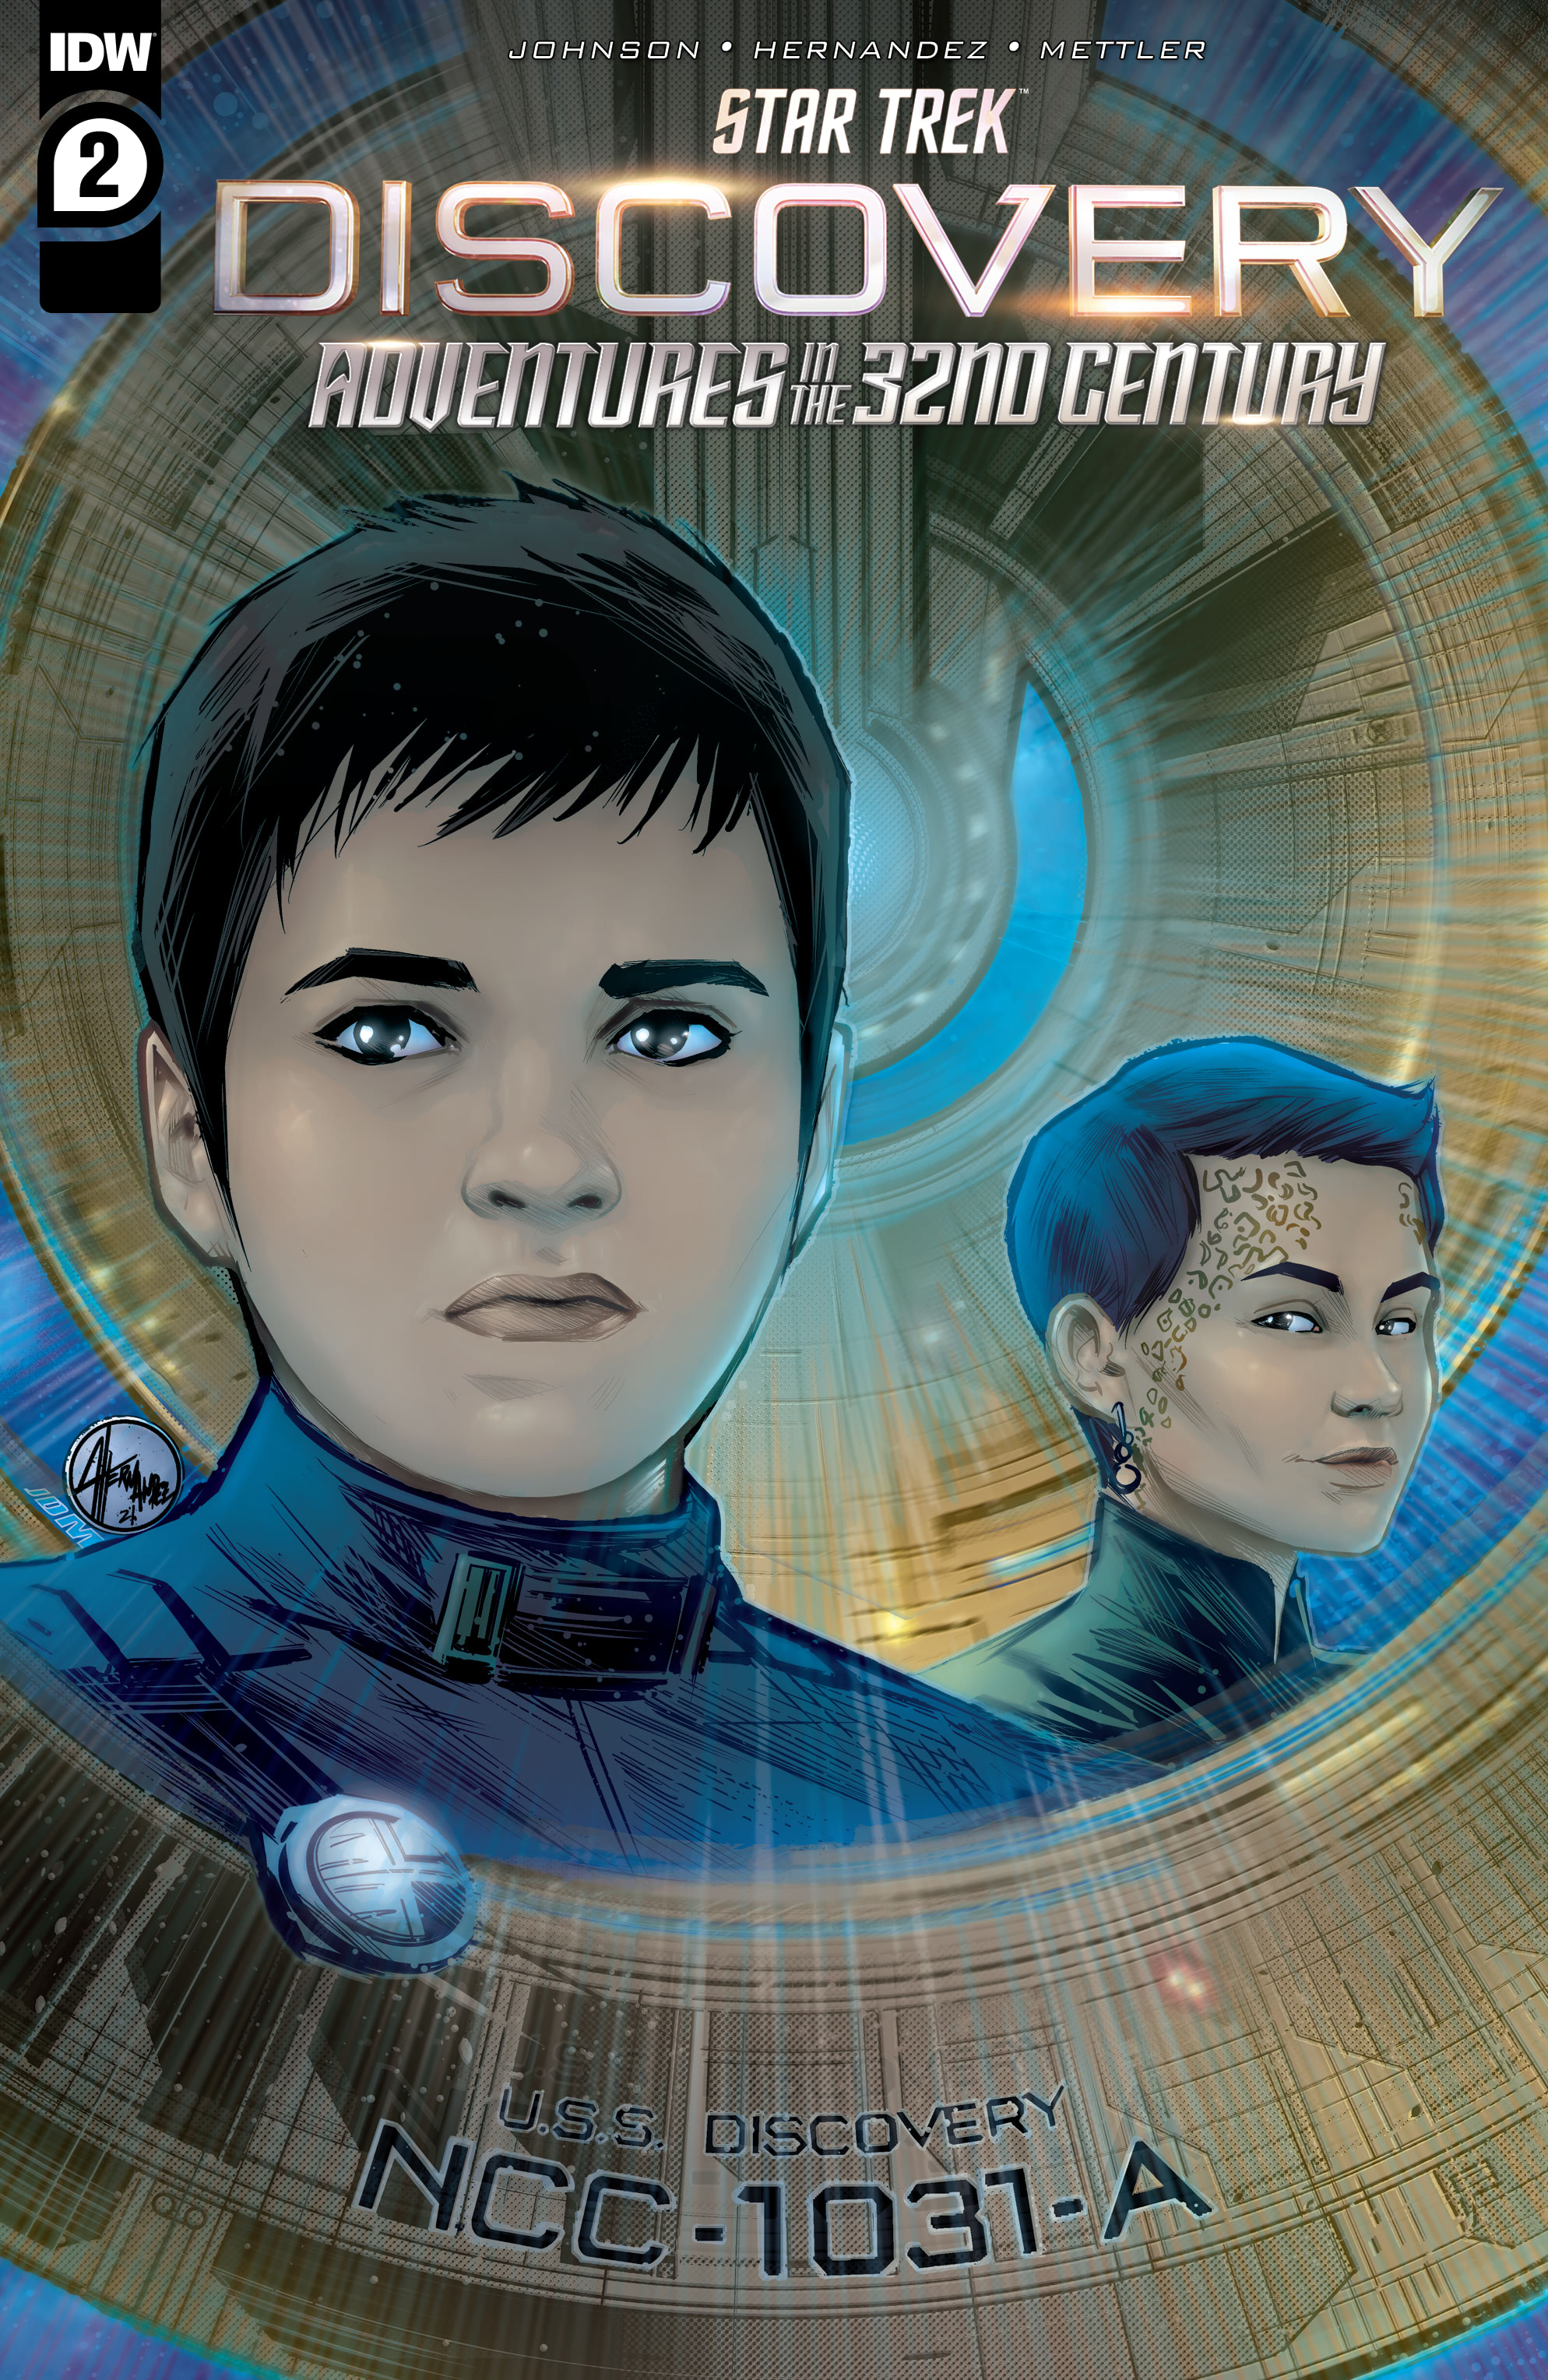 Read online Star Trek: Discovery - Adventures in the 32nd Century comic -  Issue #2 - 1